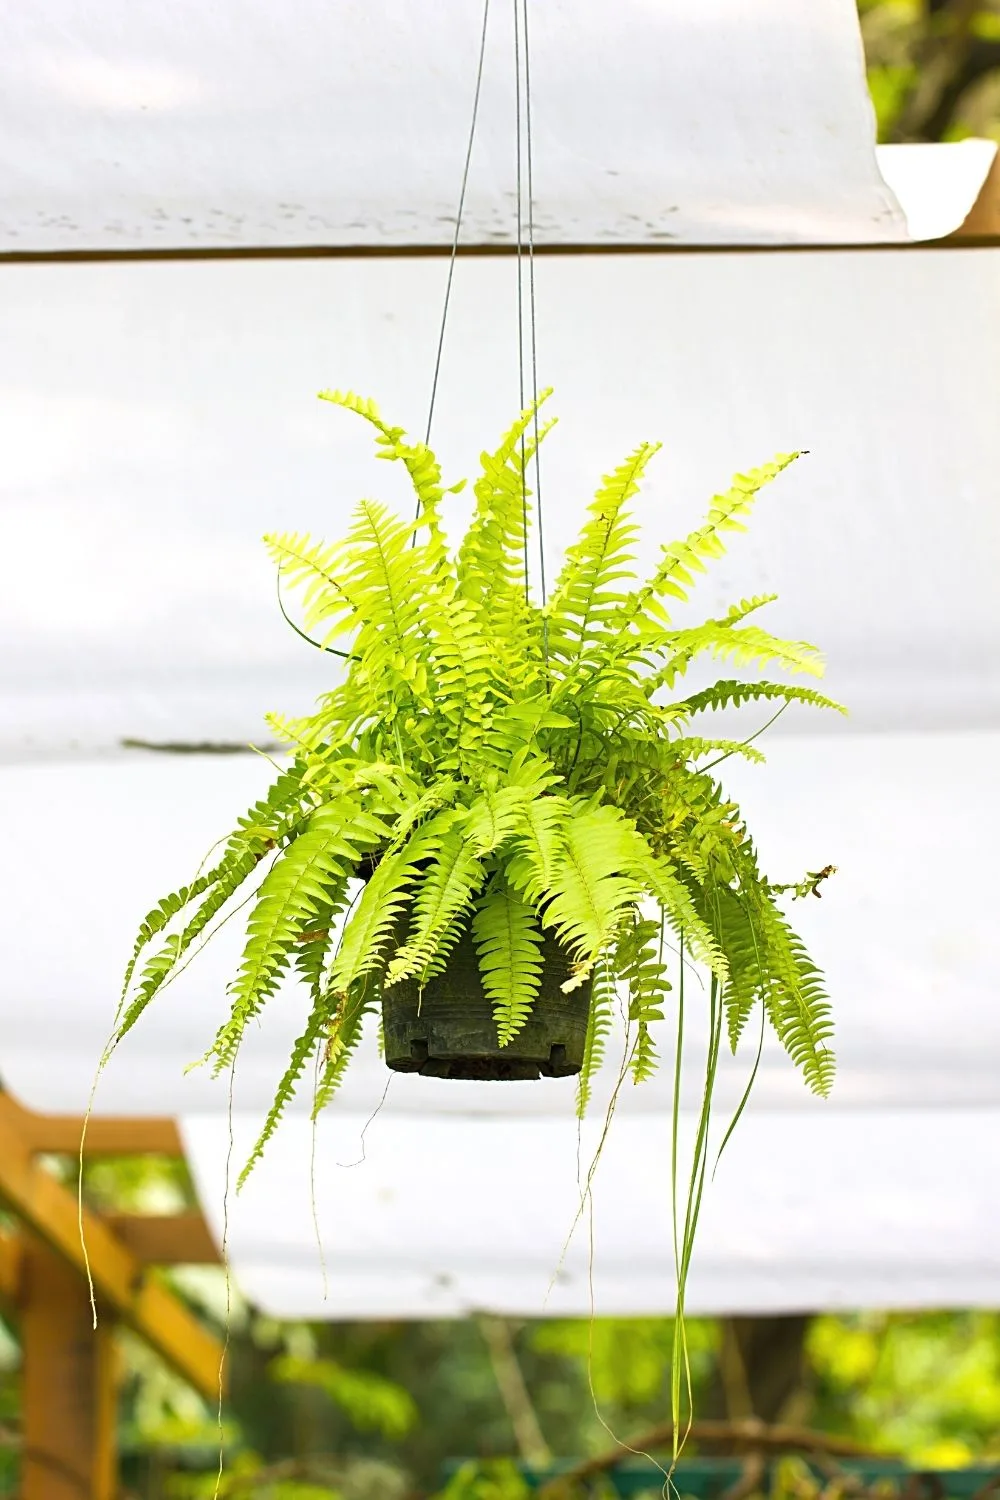 One thing that makes Boston Fern (Nephrolepis exaltata) hard to grow is that it requires high humidity; if not, fungus will grow